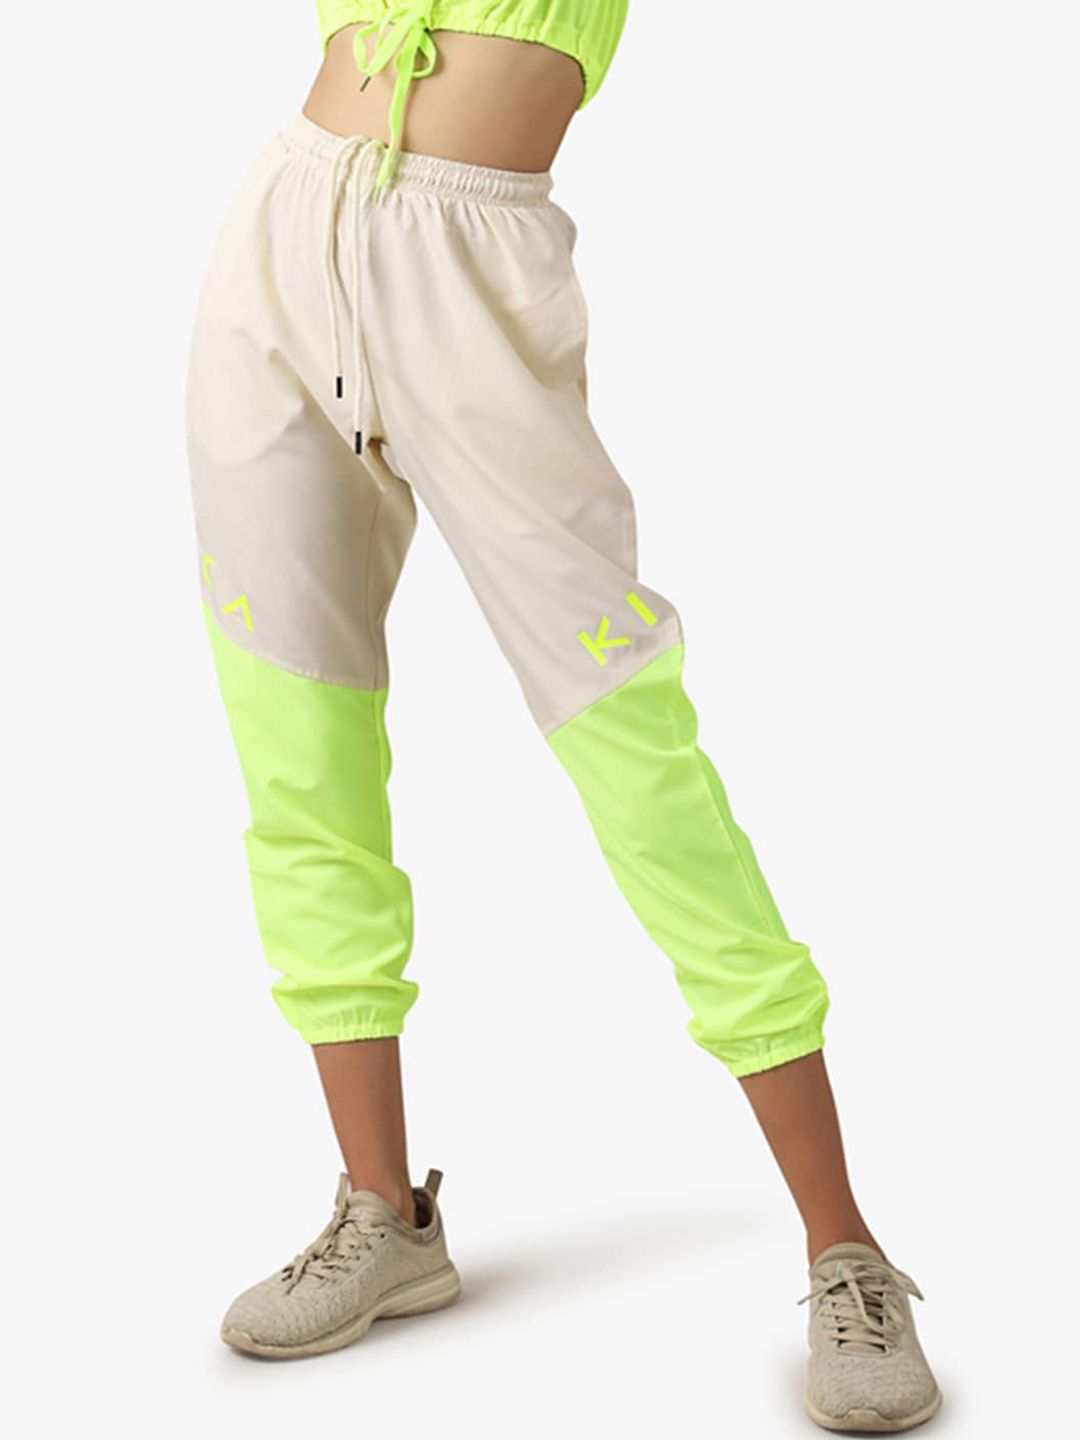 KICA Women Fluorescent Green Printed Track Pants Price in India